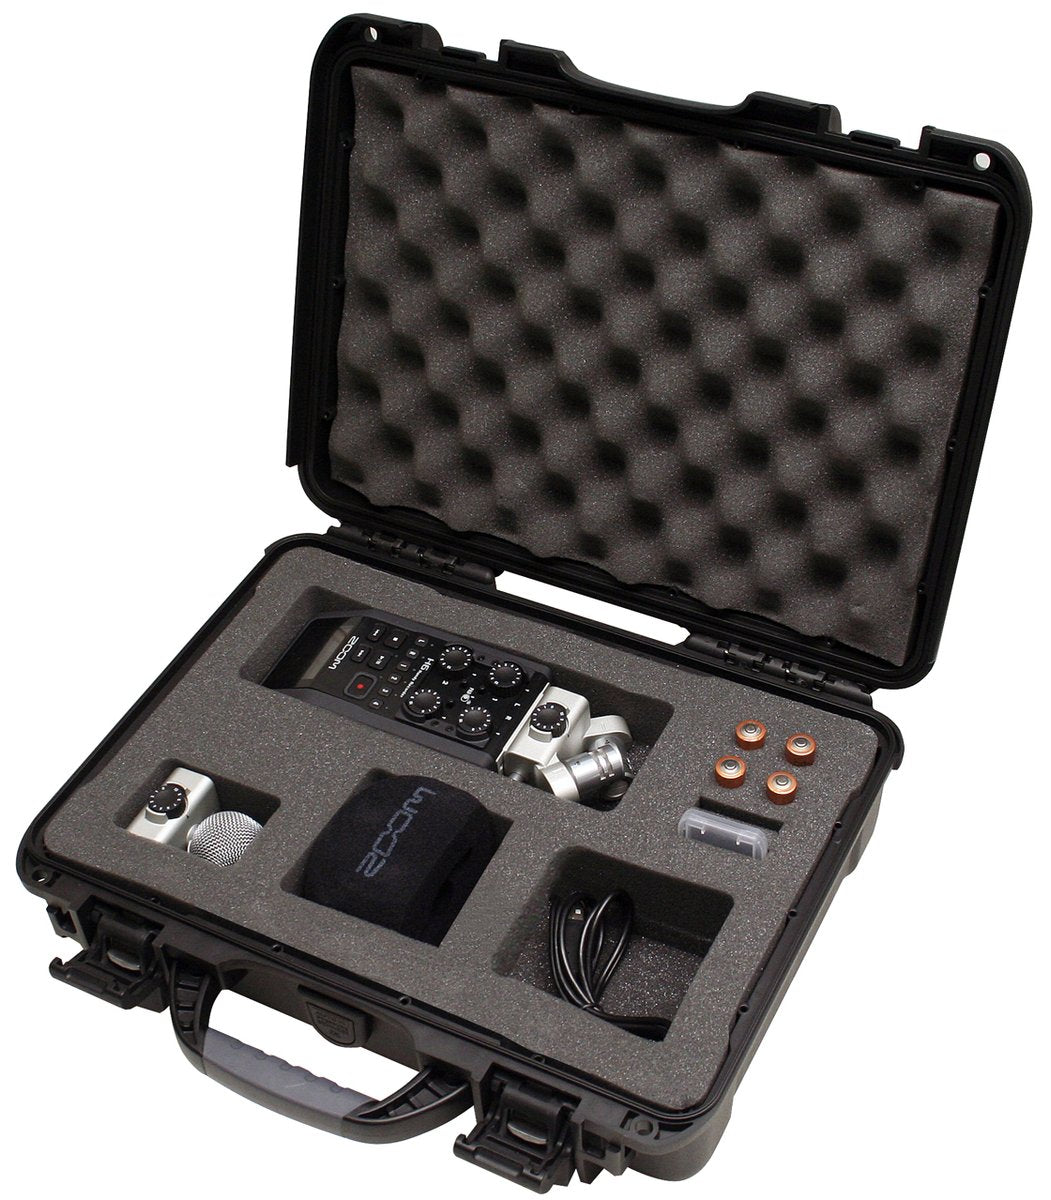 Black Waterproof Injection Molded Case with Custom Foam Insert for Zoom H6 Handheld Recorder and Accessories